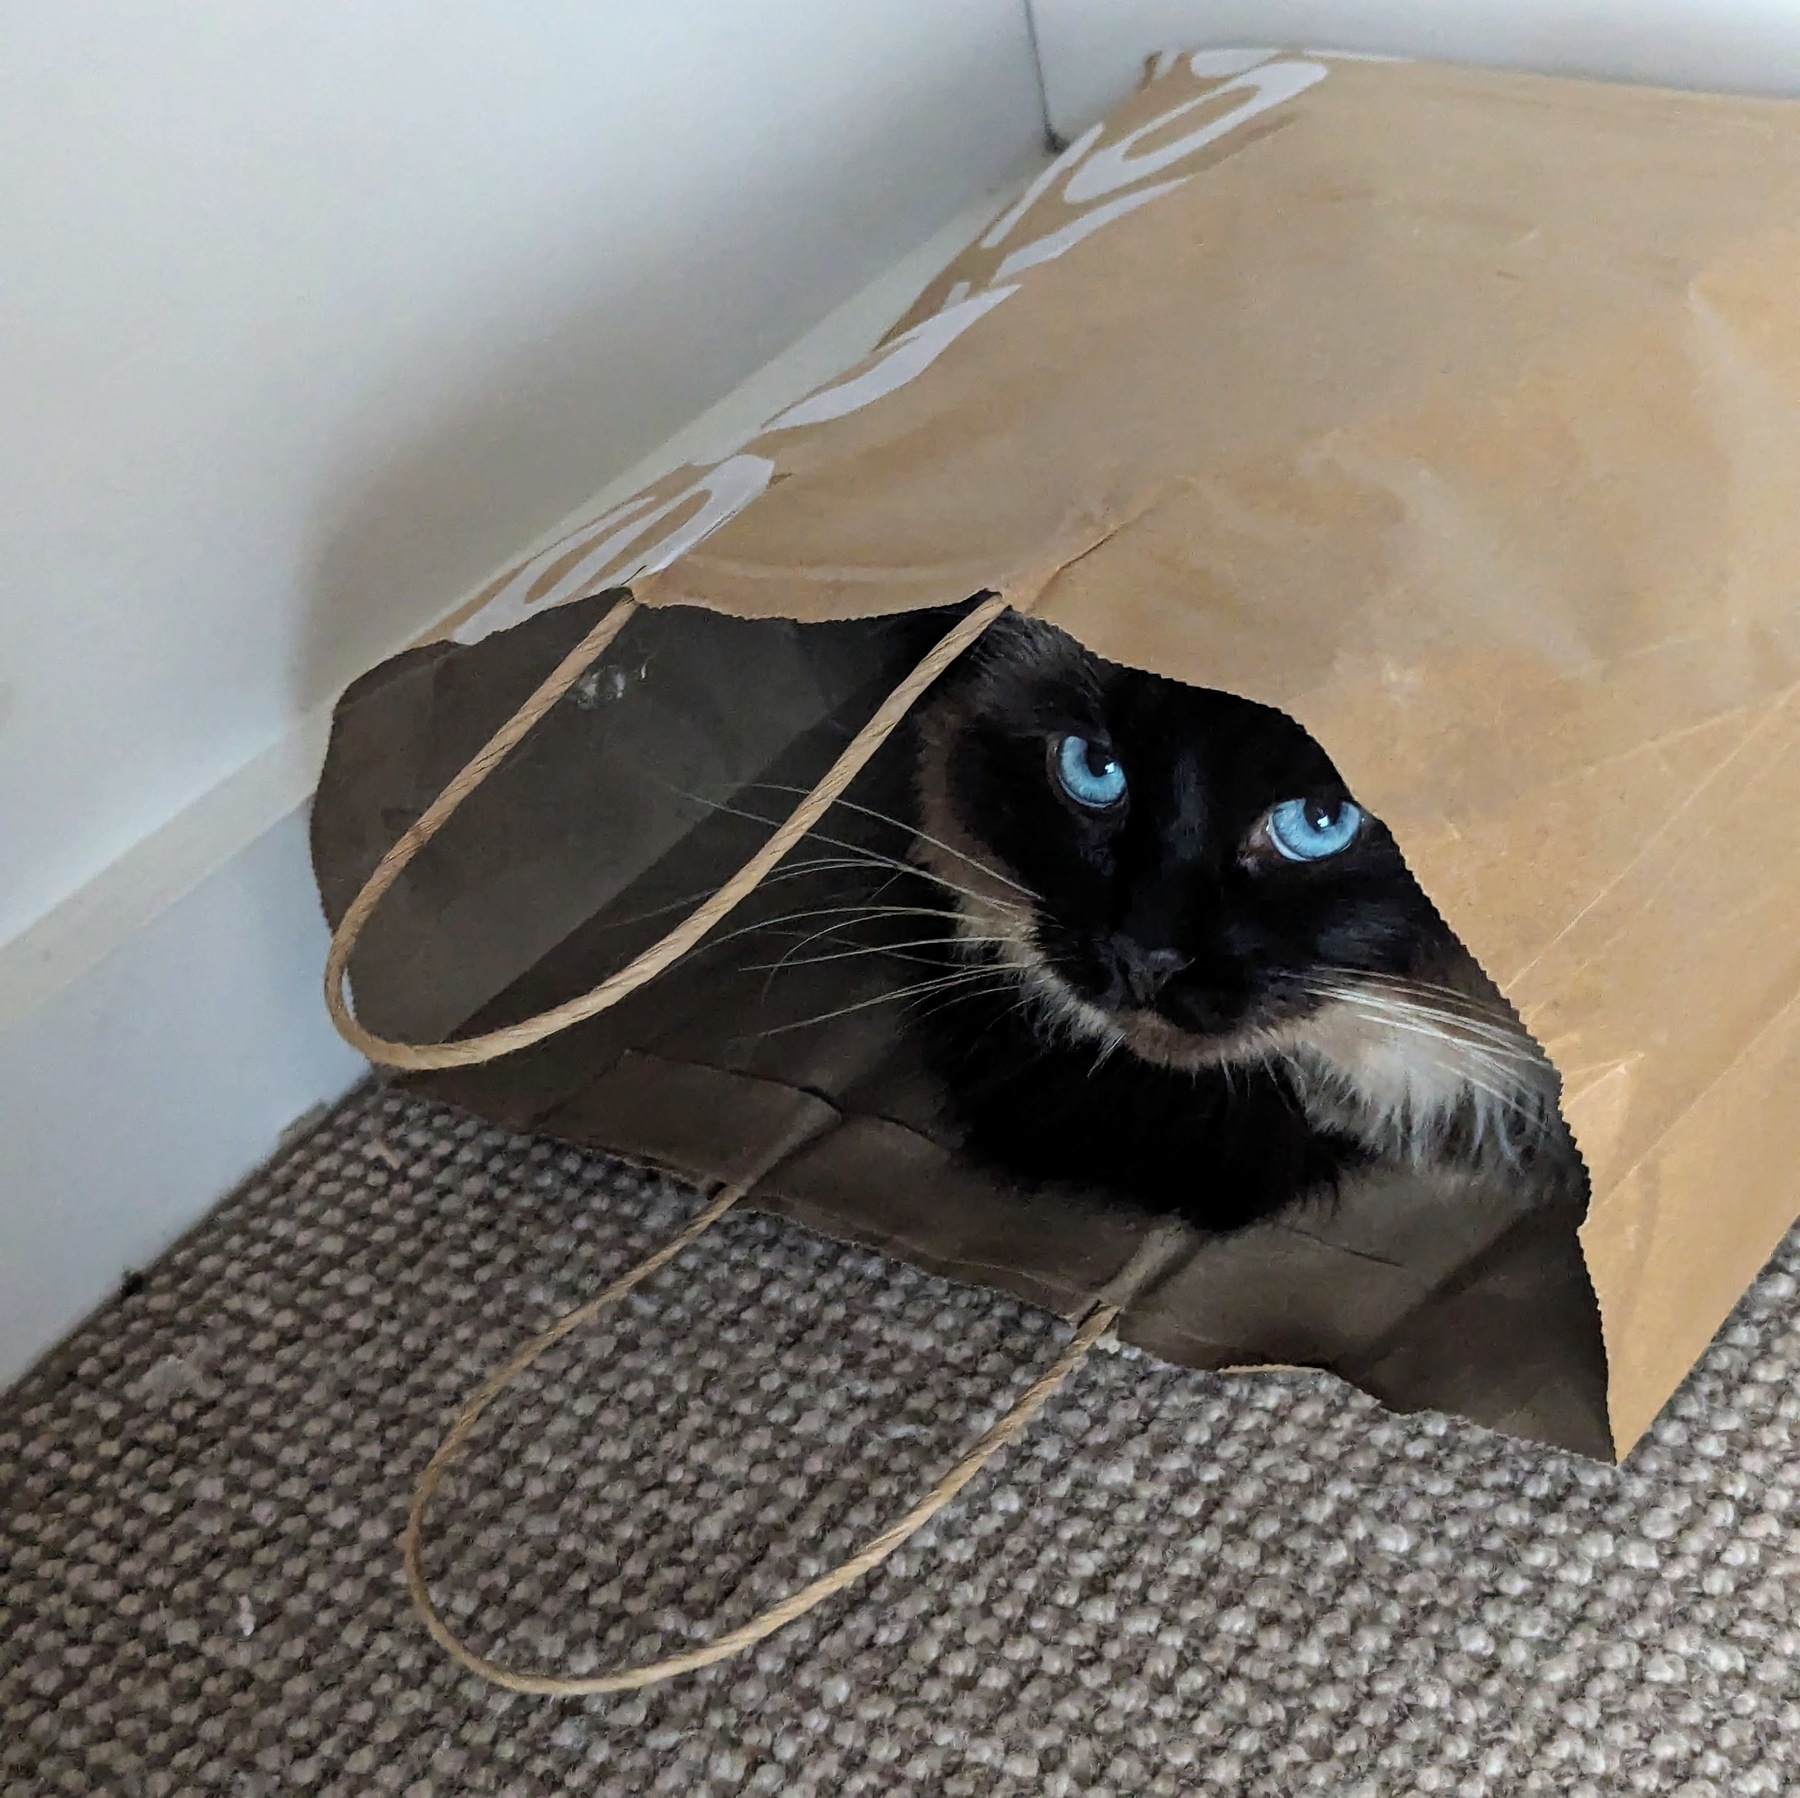 a cat sits half-hidden in a paper carrier bag on the floor